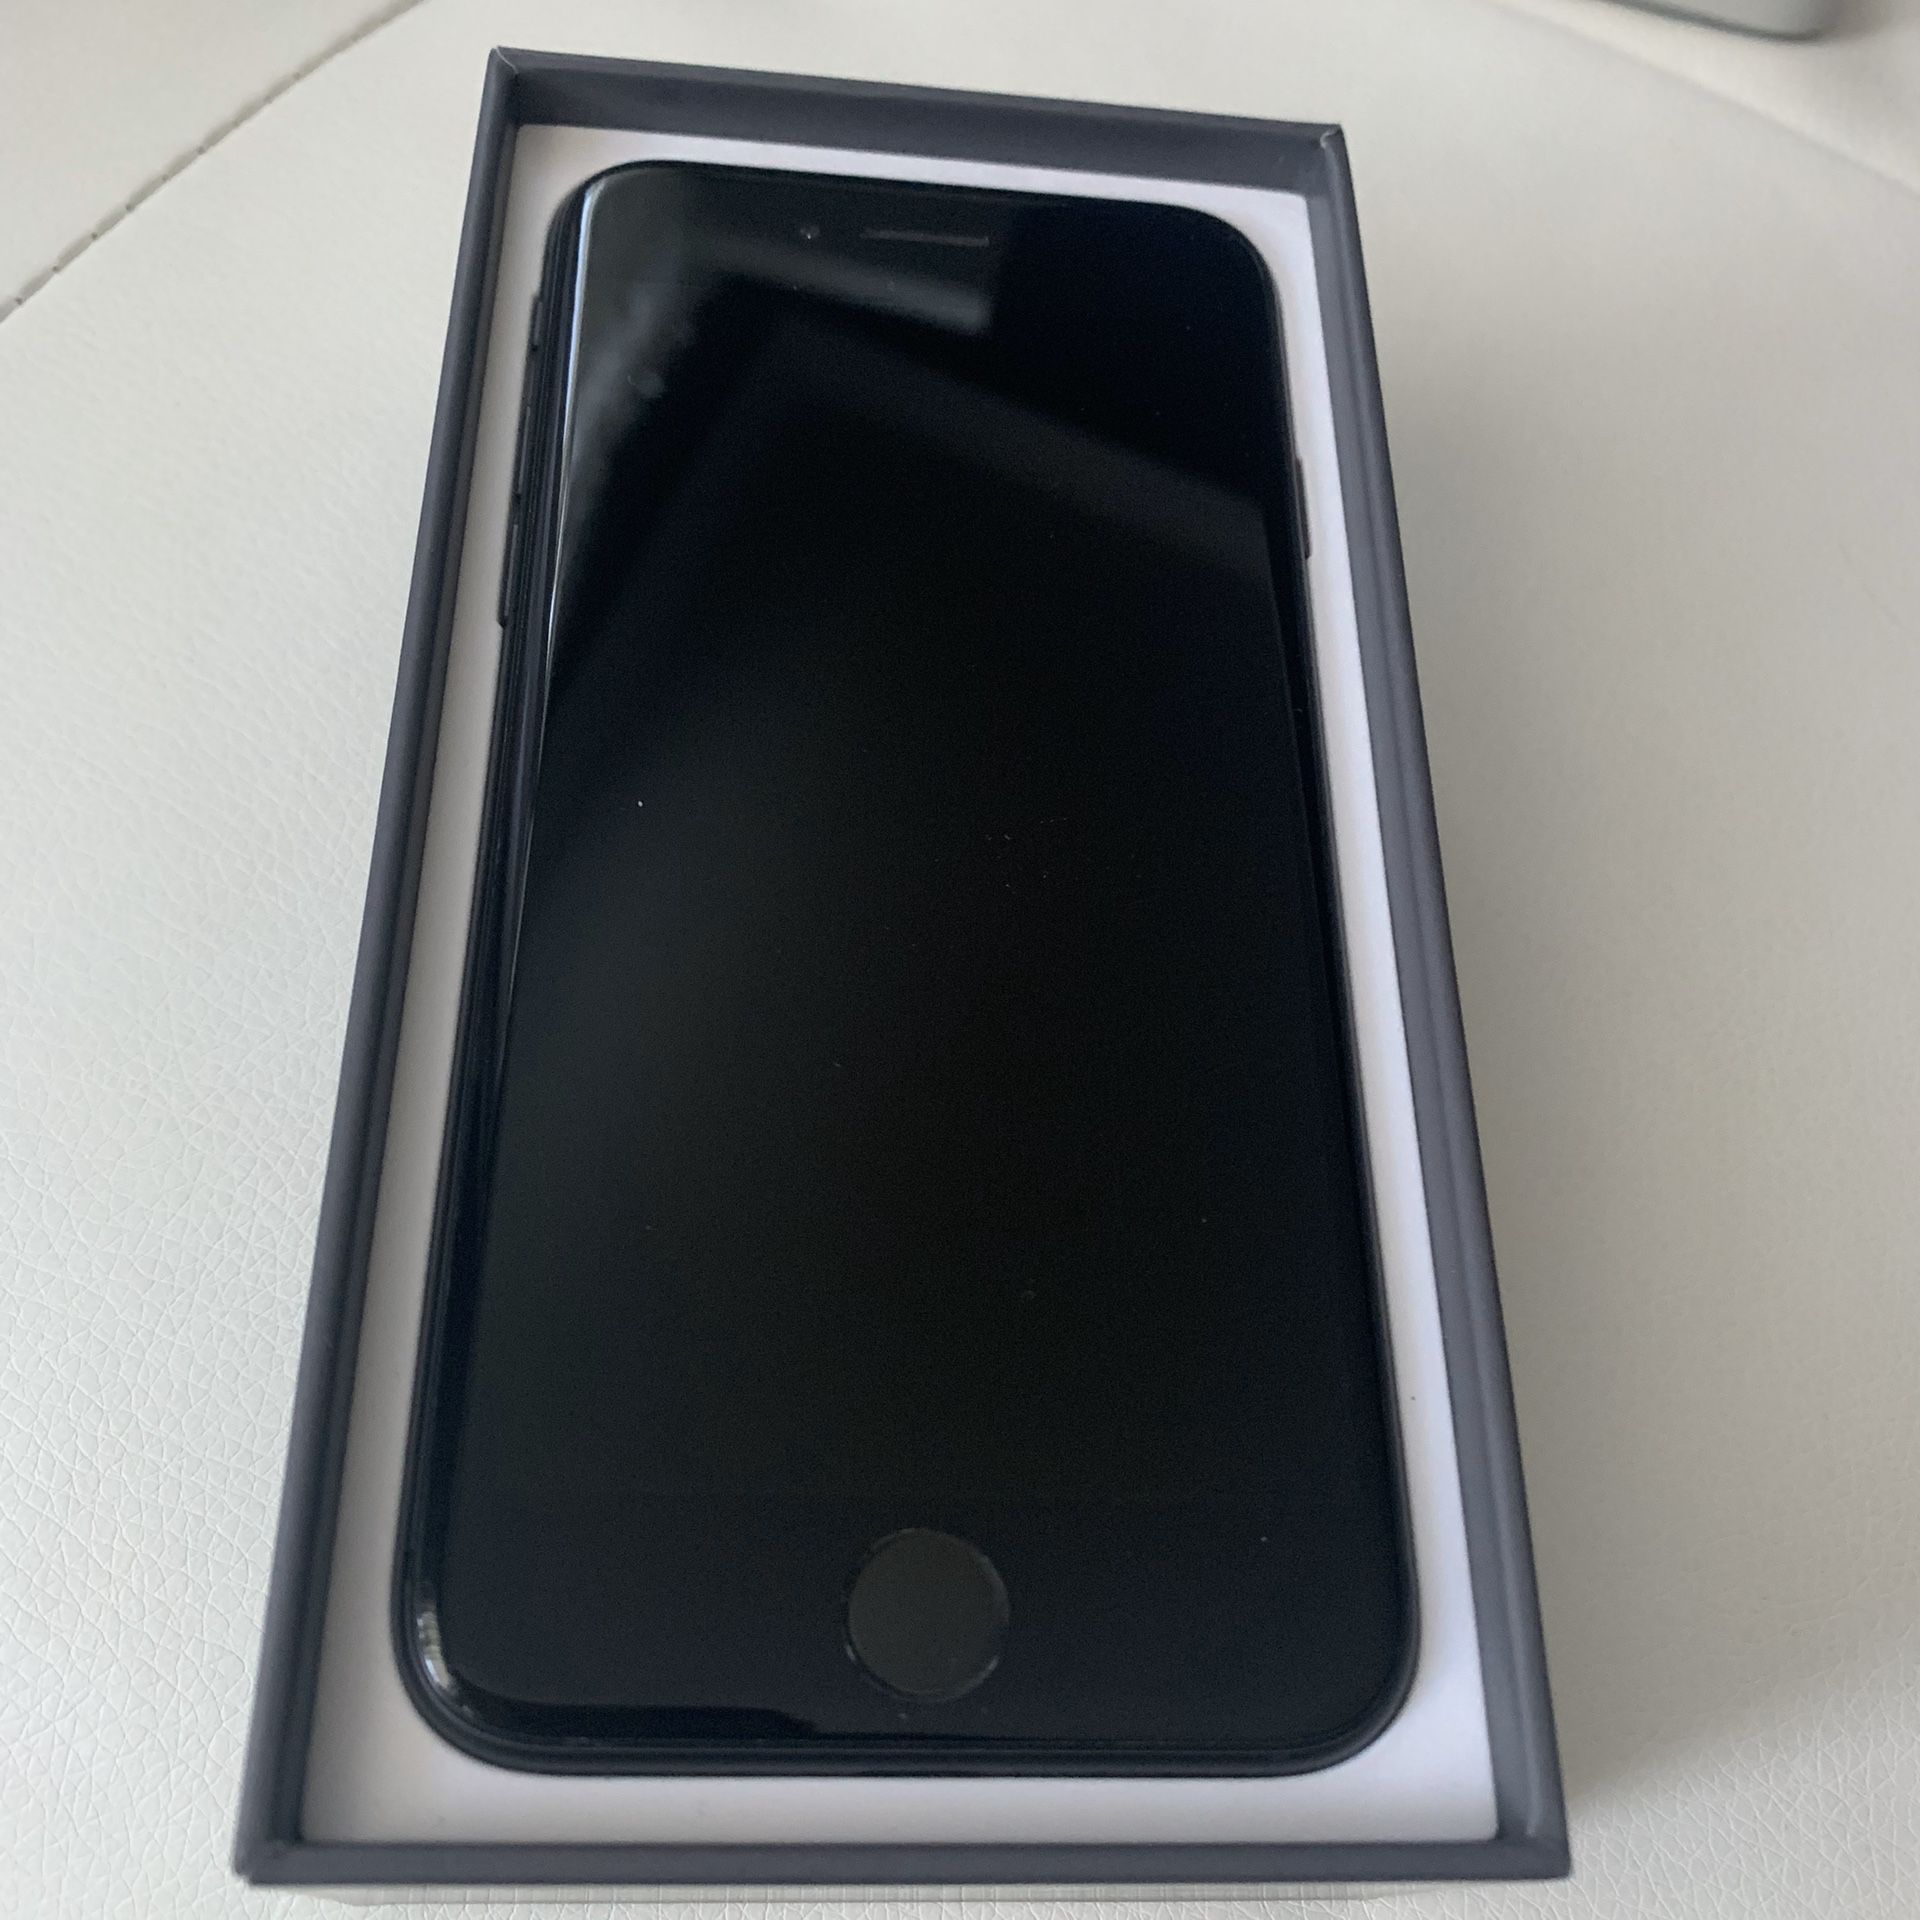 New Condition, Unlocked, 64gb, Apple IPhone 8, Space Grey